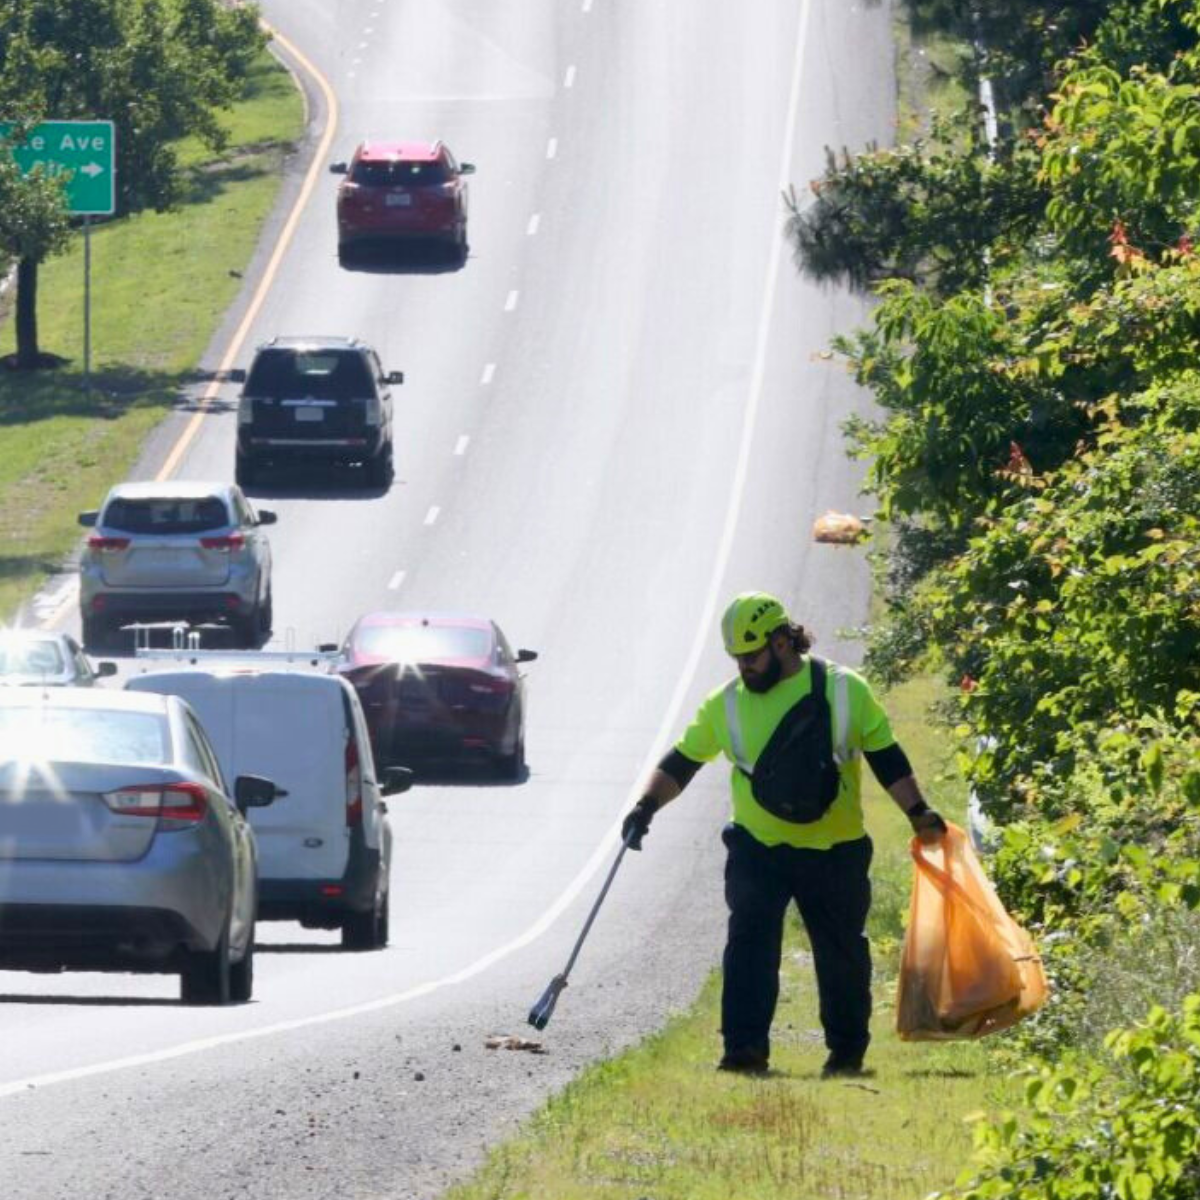 Man picking up litter from roadway as cars drive by.